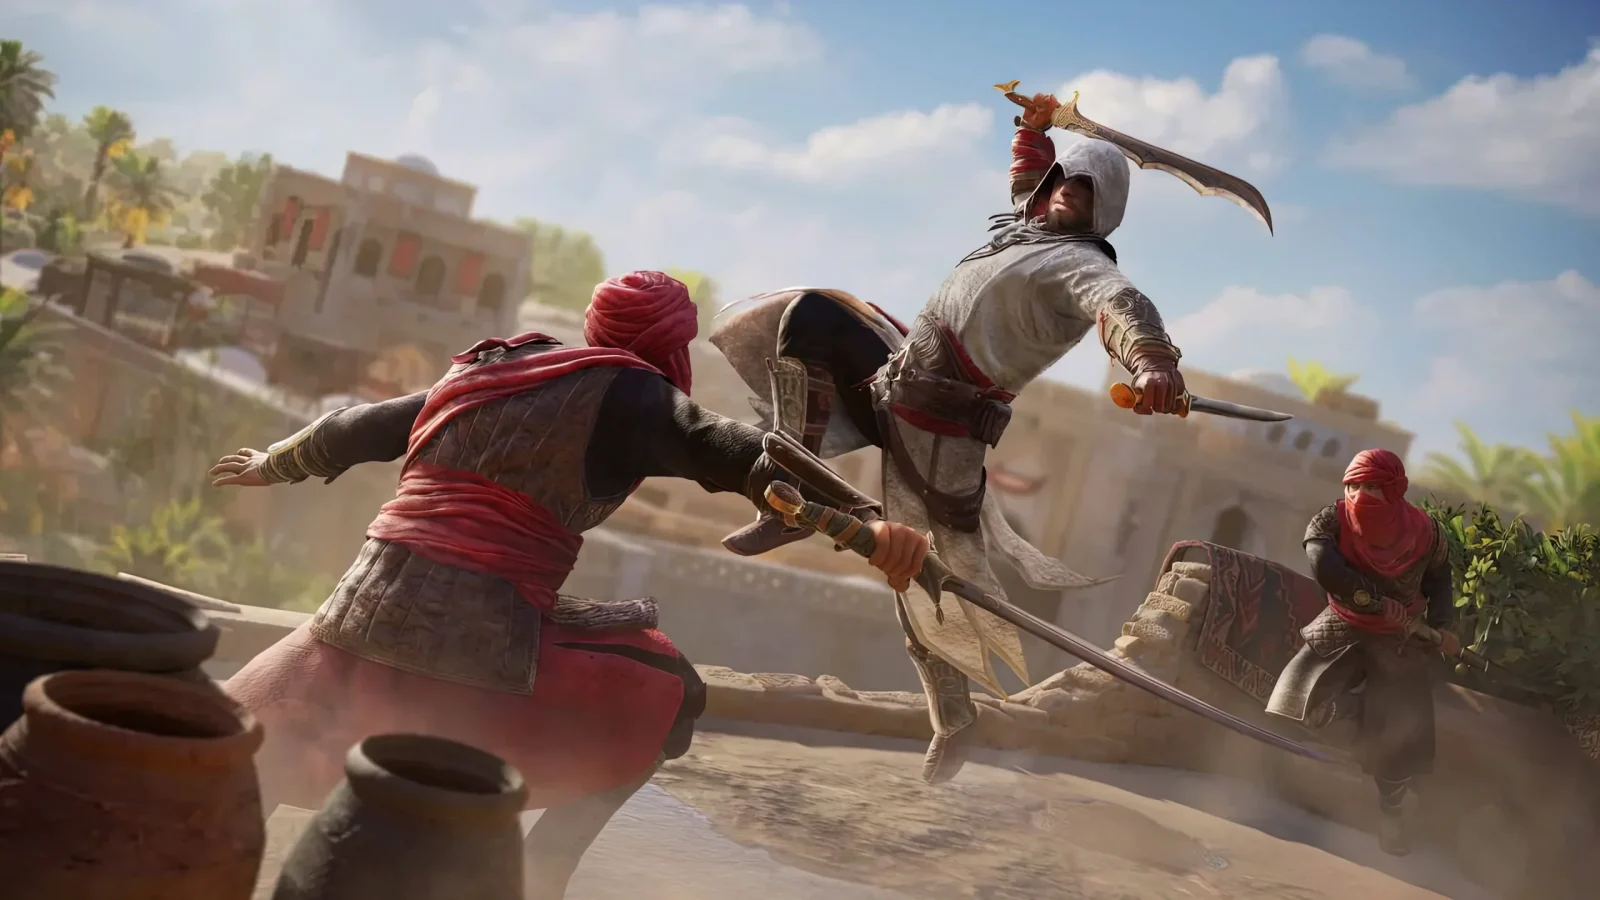 The wild story behind why the first Assassin's Creed has side missions